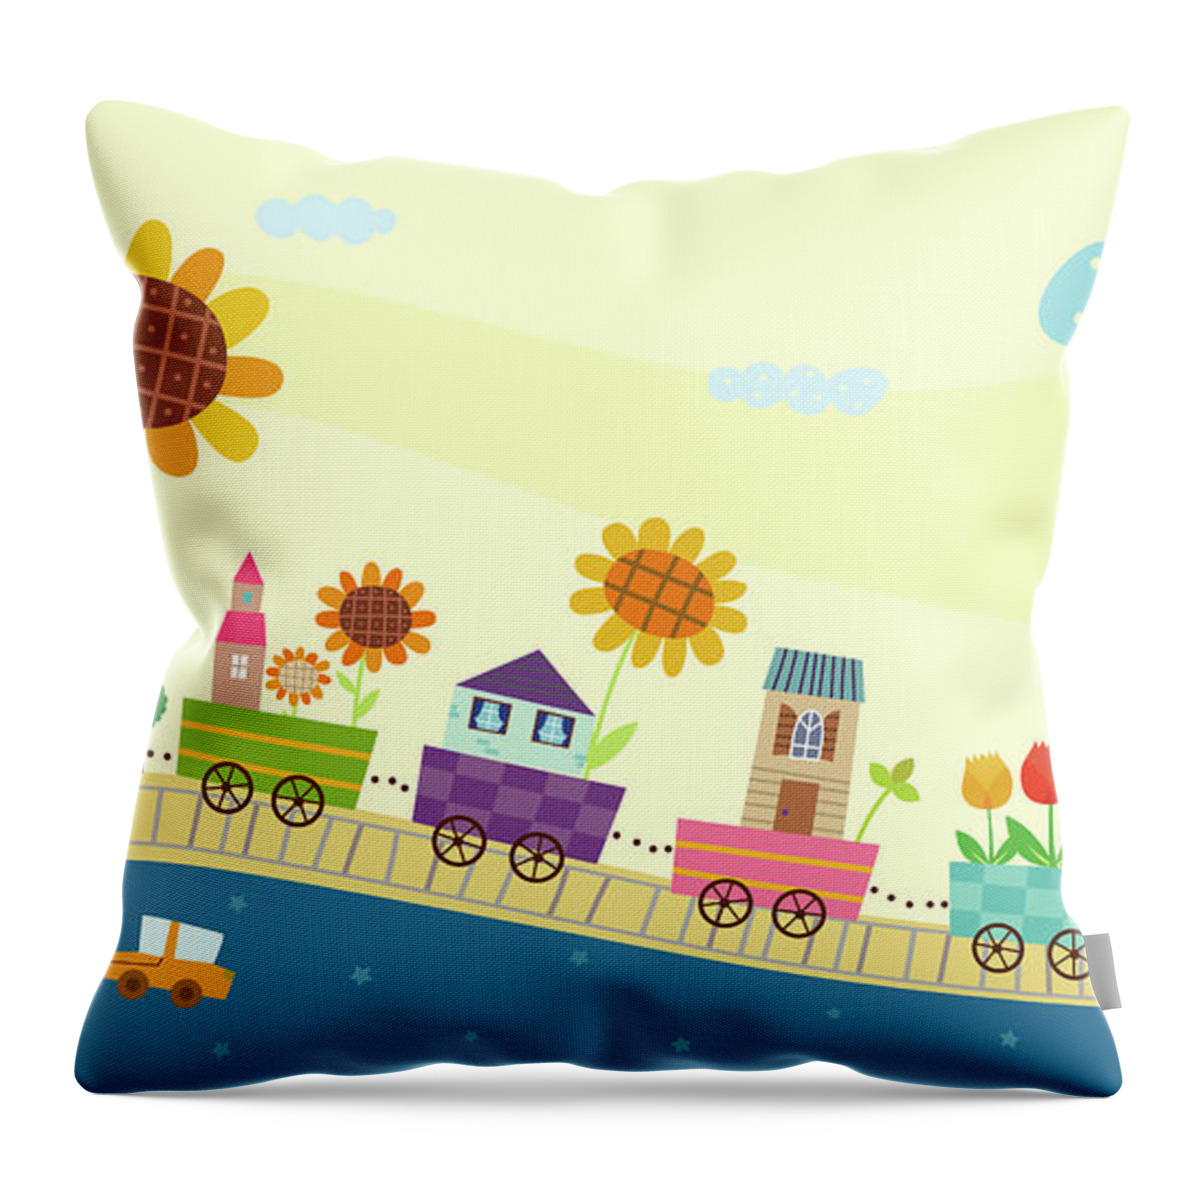 Rail Transportation Throw Pillow featuring the digital art View Of Town #3 by Eastnine Inc.